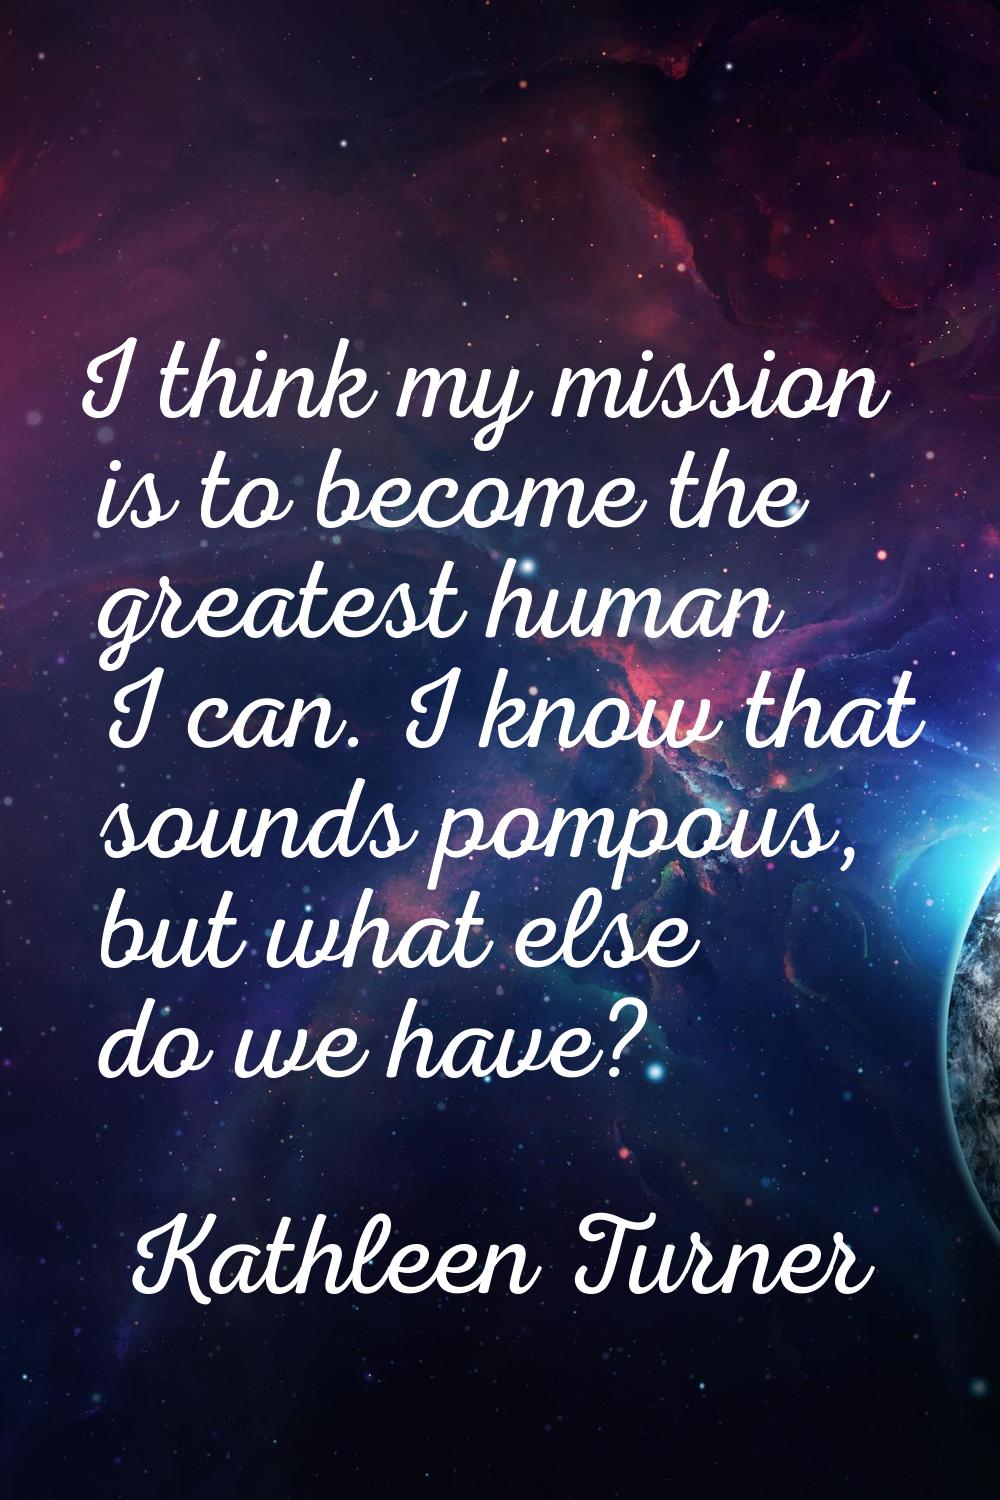 I think my mission is to become the greatest human I can. I know that sounds pompous, but what else